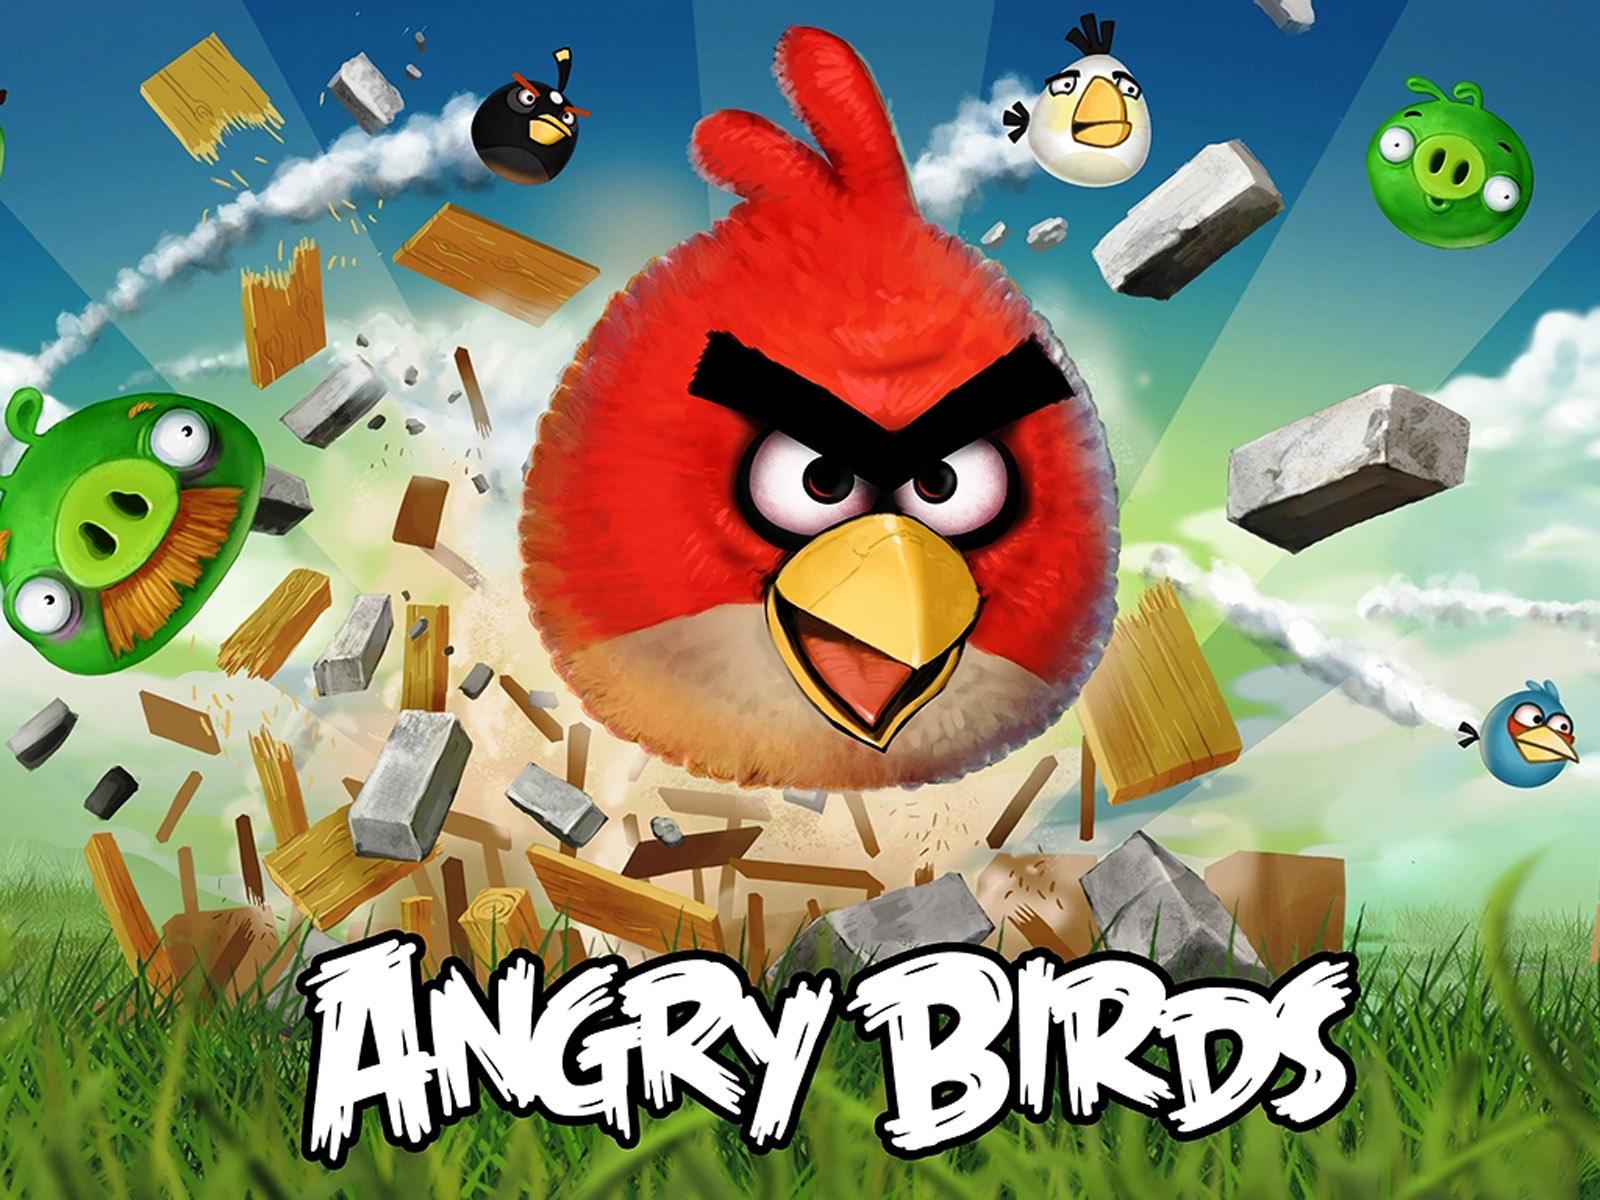 Angry Birds Wallpapers Desktop Game Pictures Download 1600x1200 1600x1200